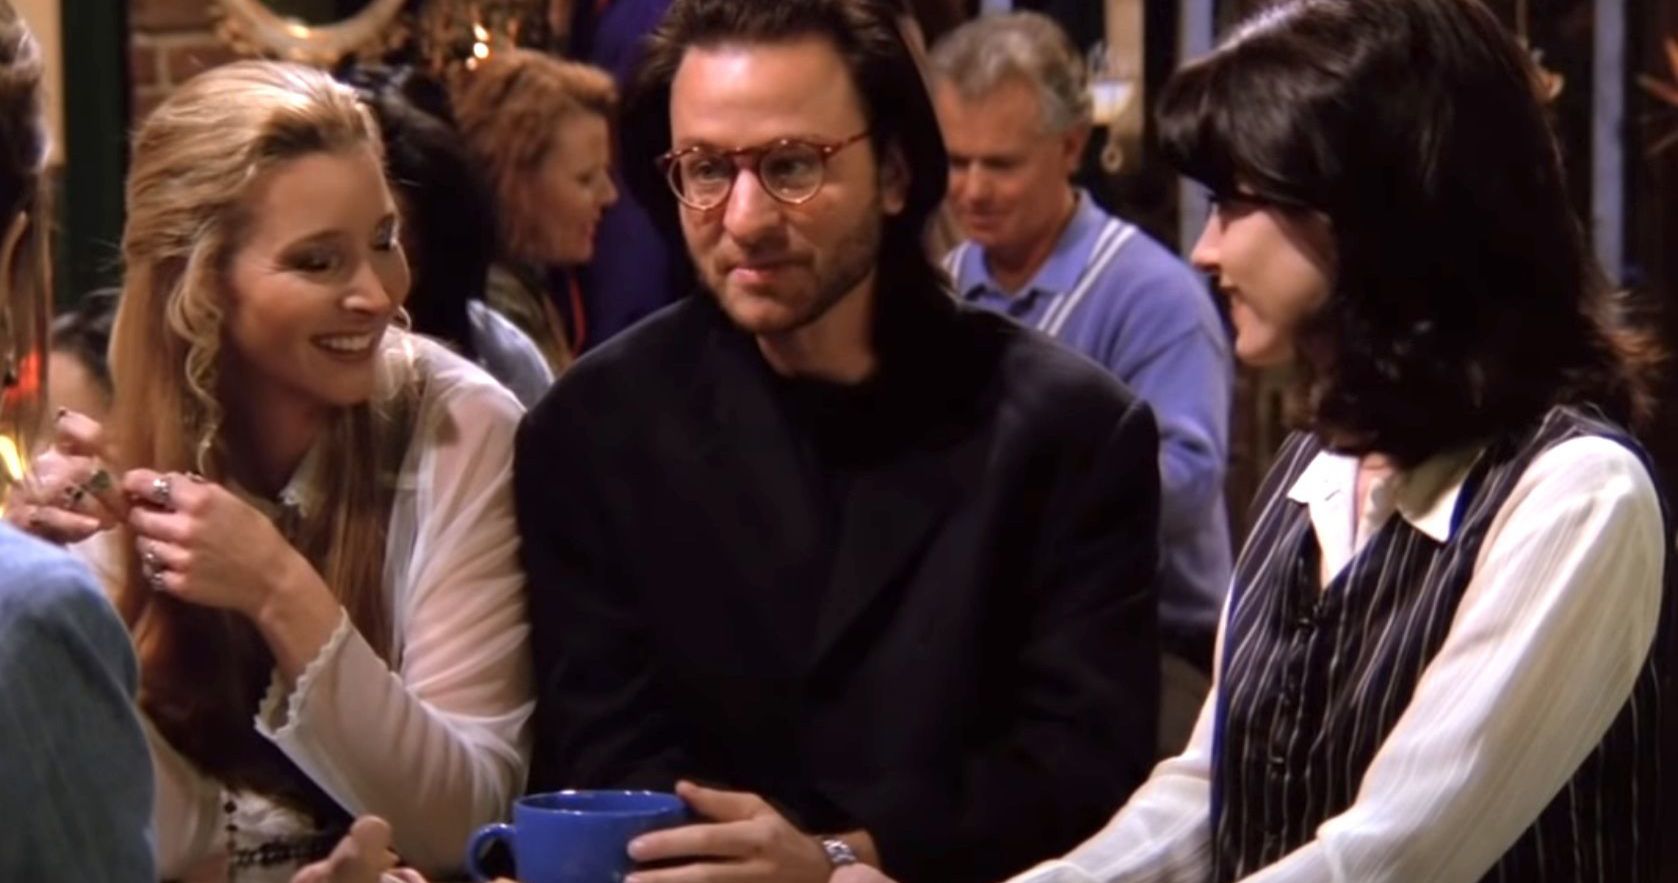 Friends Guest Star Fisher Stevens Apologizes to Cast for Poor On-Set Behavior